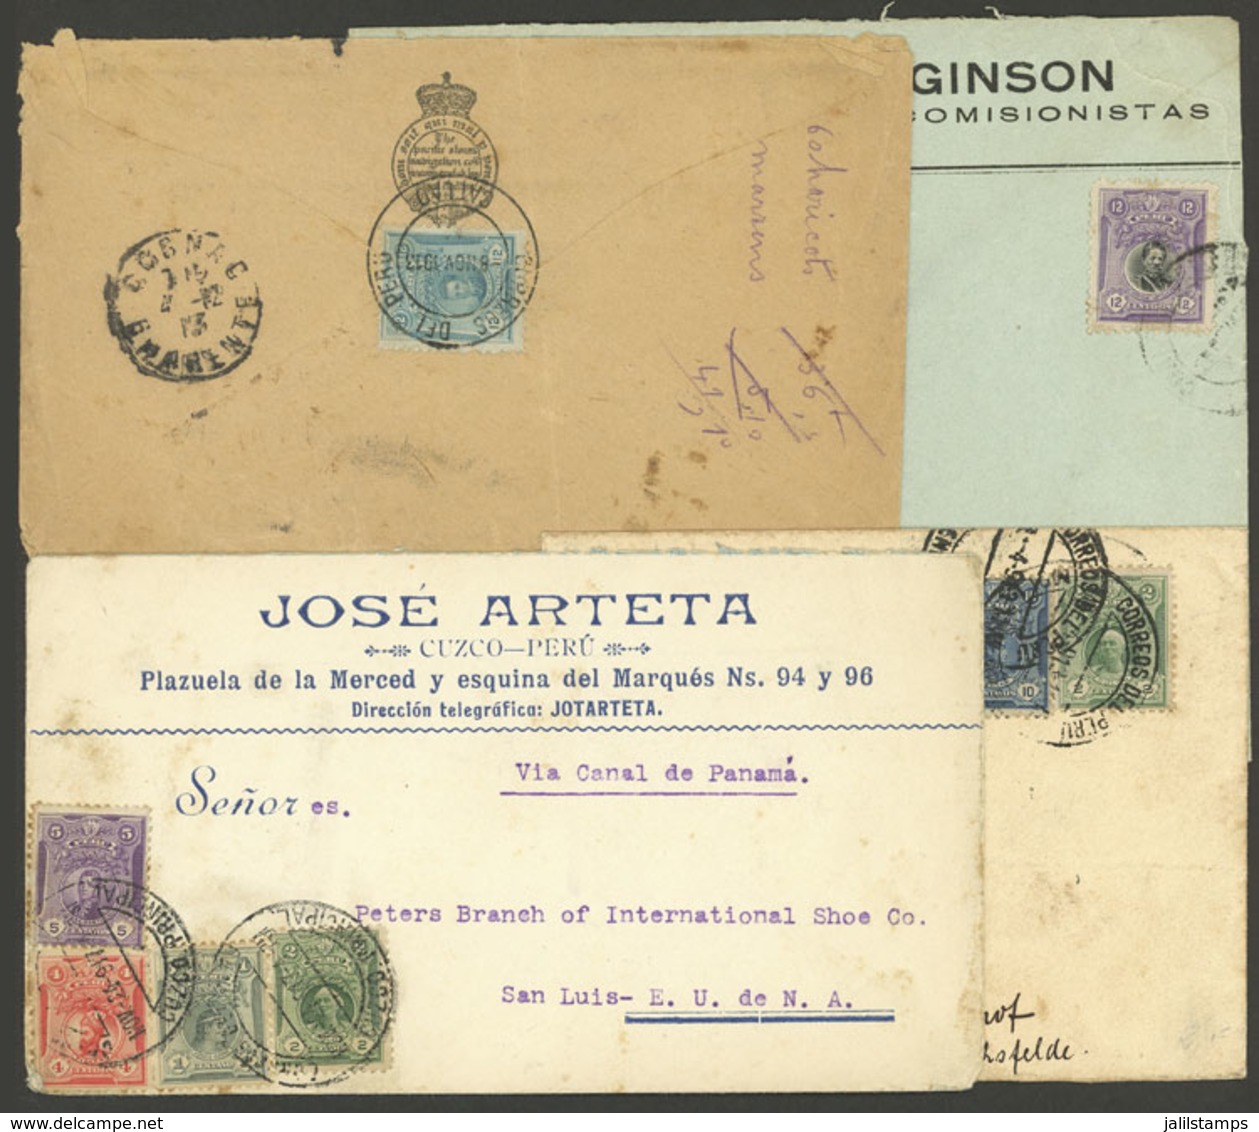 PERU: 4 Covers Mailed Overseas Between 1913 And 1917 Via The Panama Canal, With 12c. Postage (all Different), Very Nice! - Perù